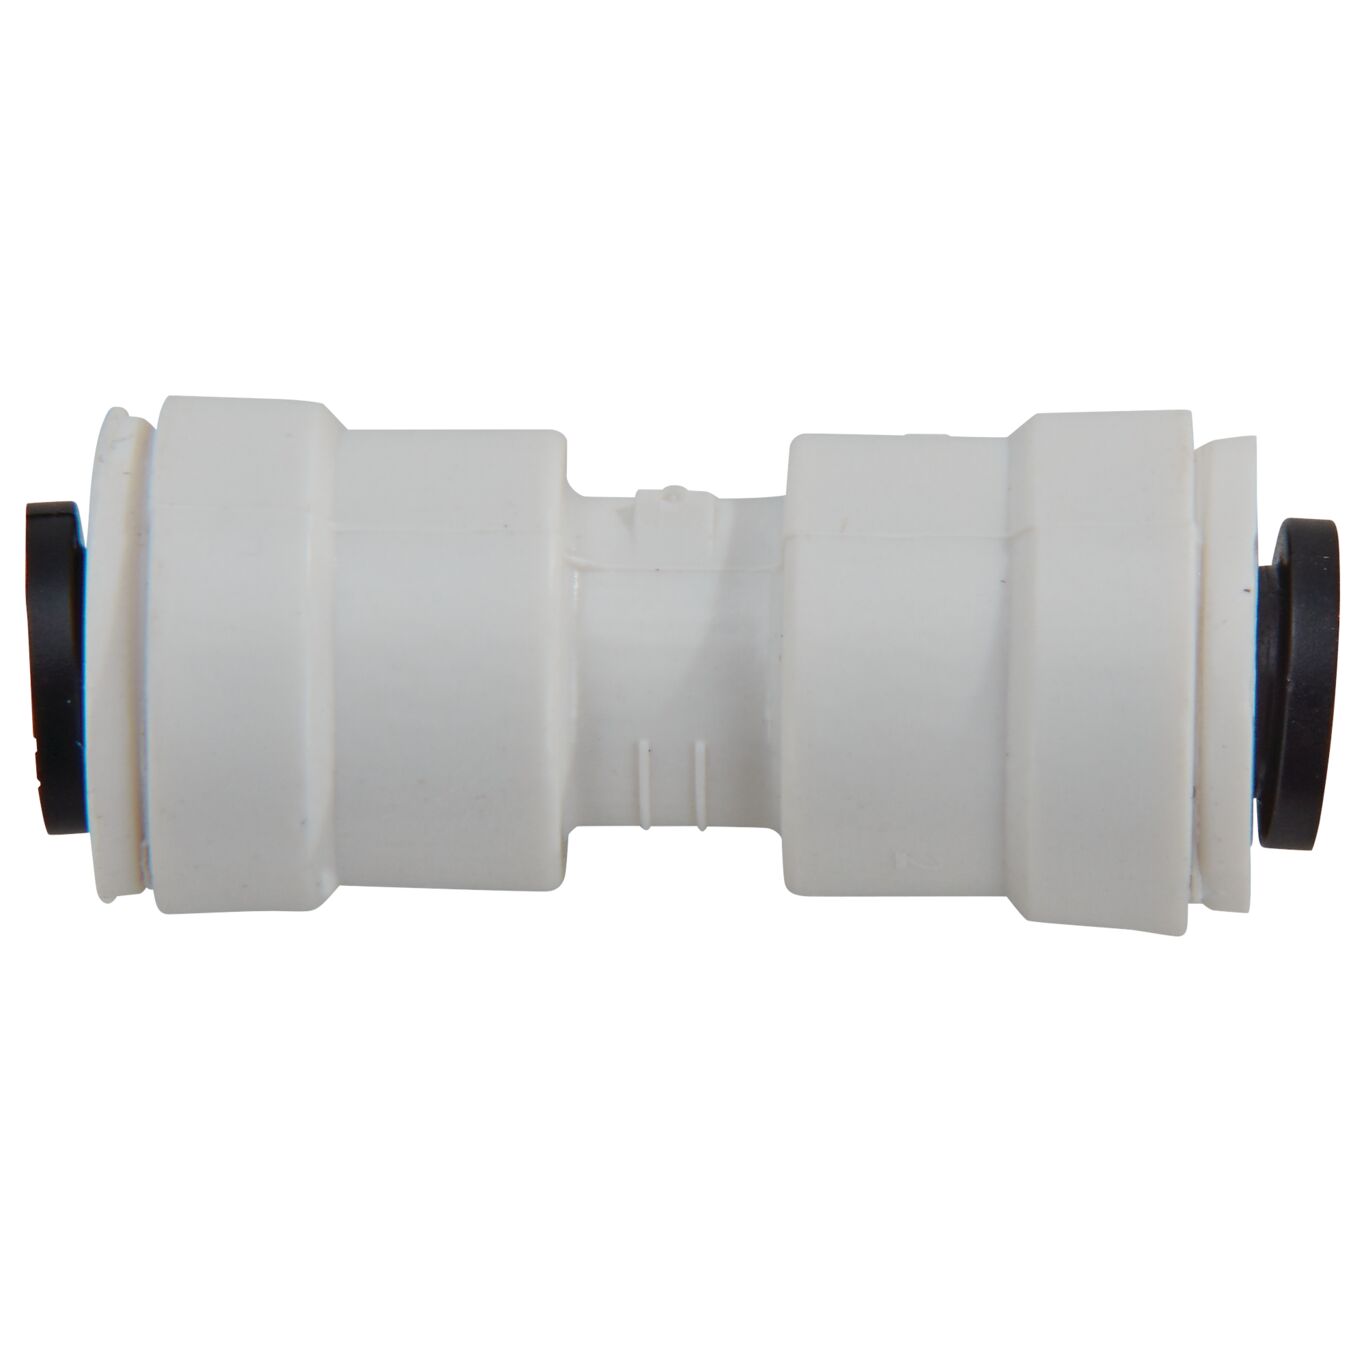 AquaLock Push-to-Connect Fittings